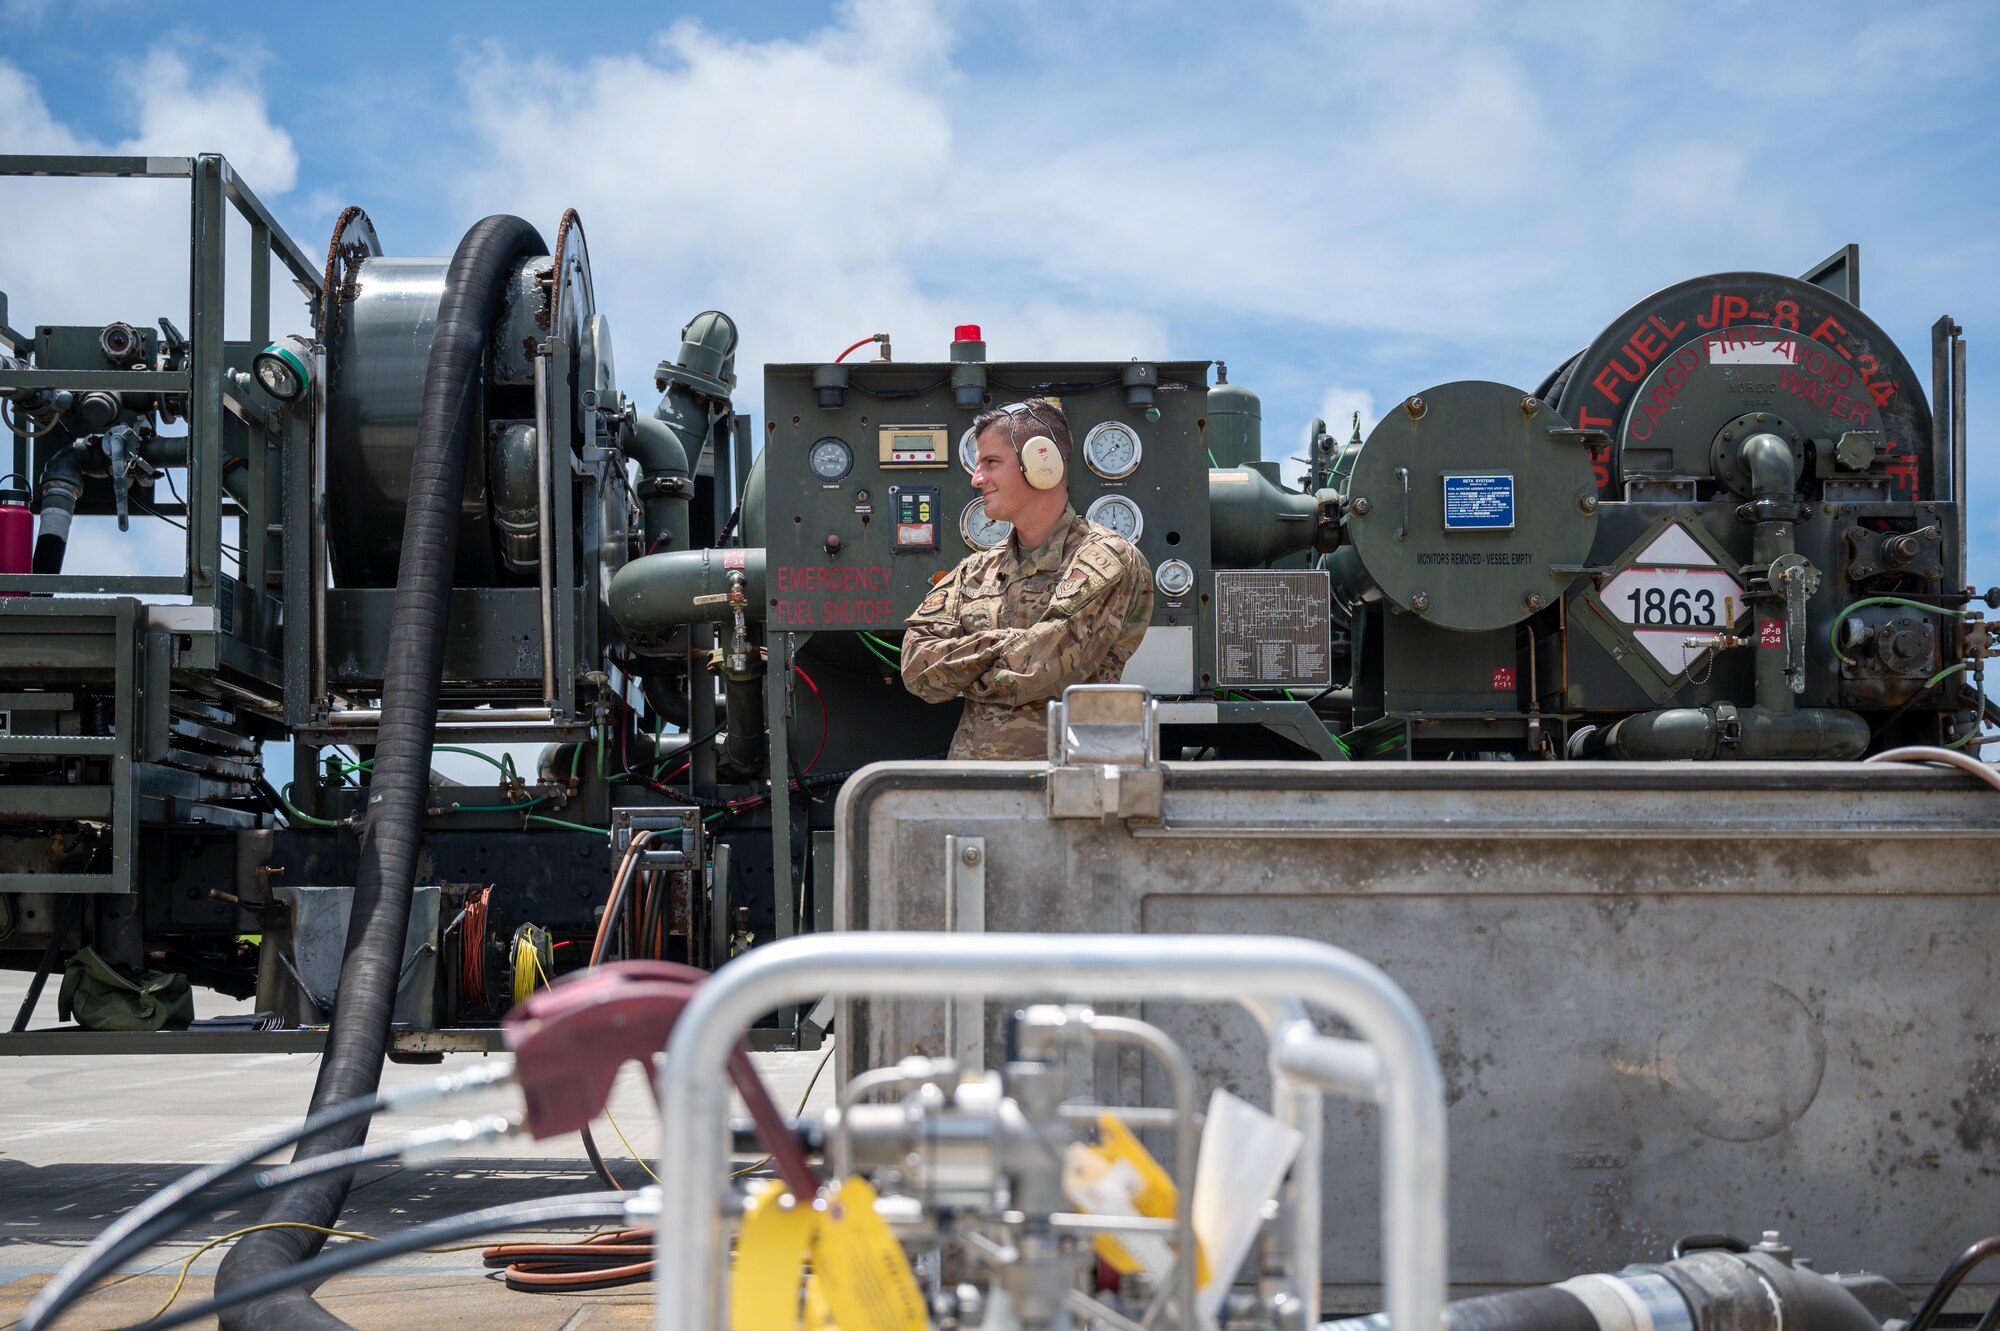 Airman stands in front of a fuel truck